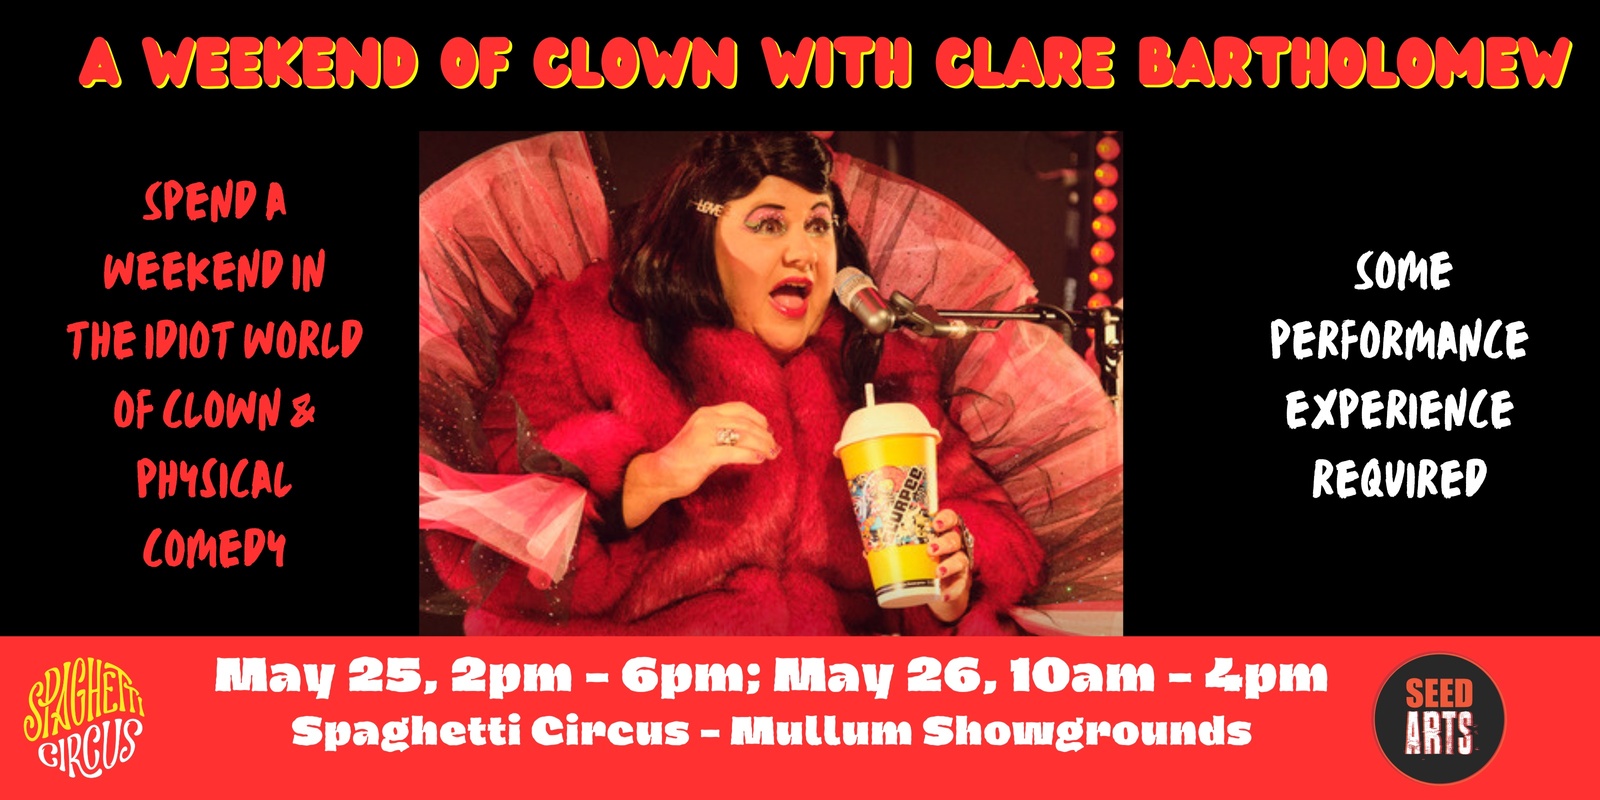 Banner image for 2 days of 'Clown with Clare' in Mullum: May 25, 2-6pm & 26, 10-4pm